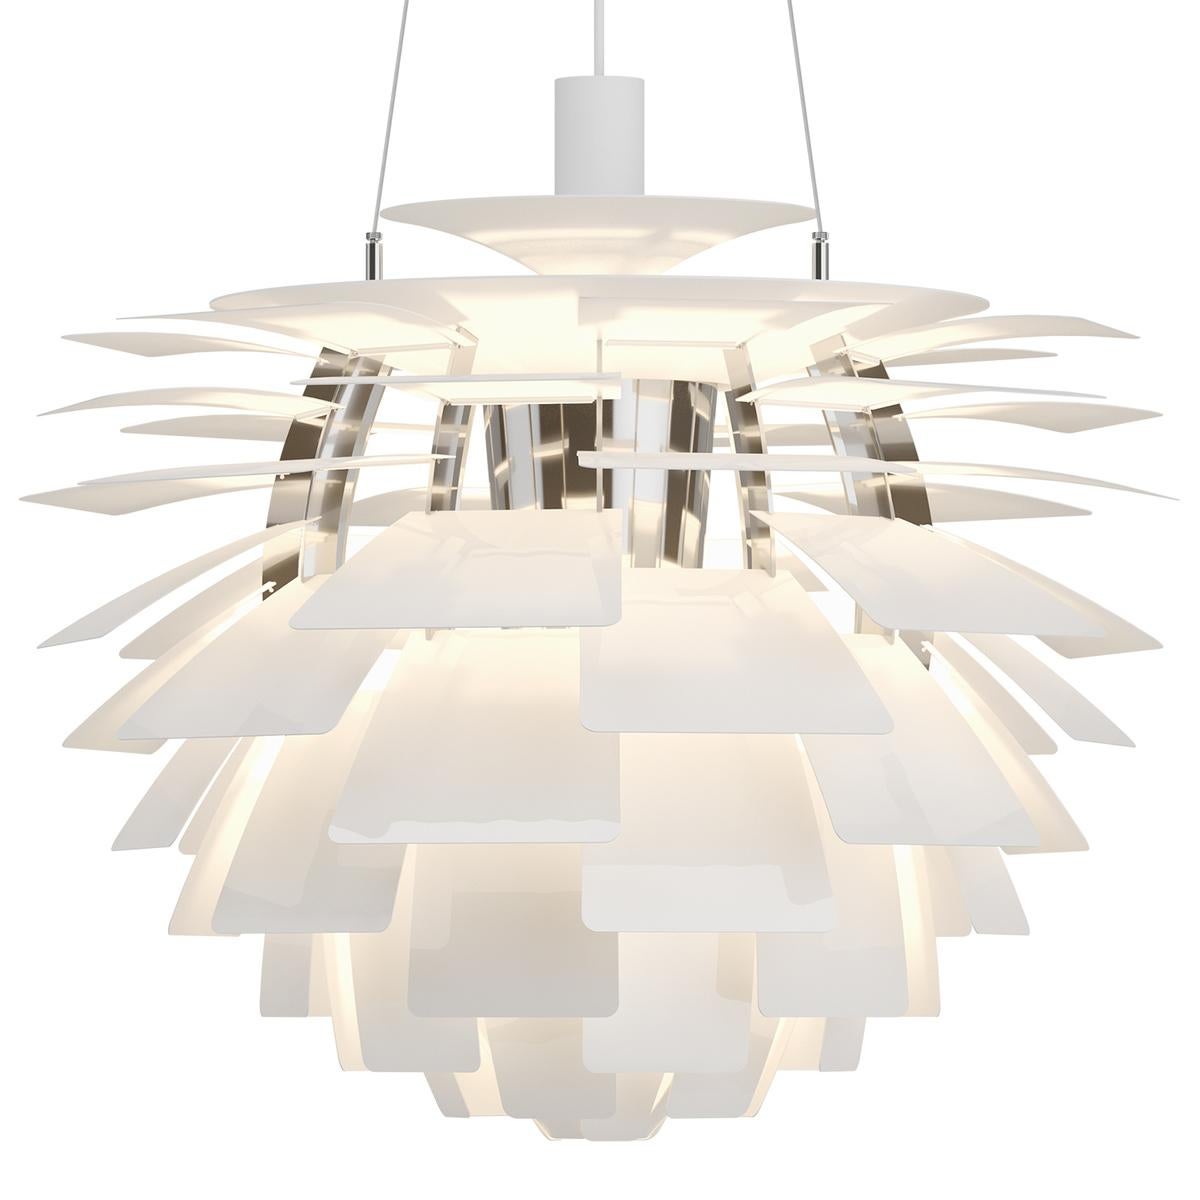 One of the most iconic, modern lighting designs, the PH Artichoke Pendant Light's origin is ju st as noteworthy. Originally designed in 1958 for the Langelinie Pavillonen restaurant located in Denmark's capital Copehagen, the modern pendant light